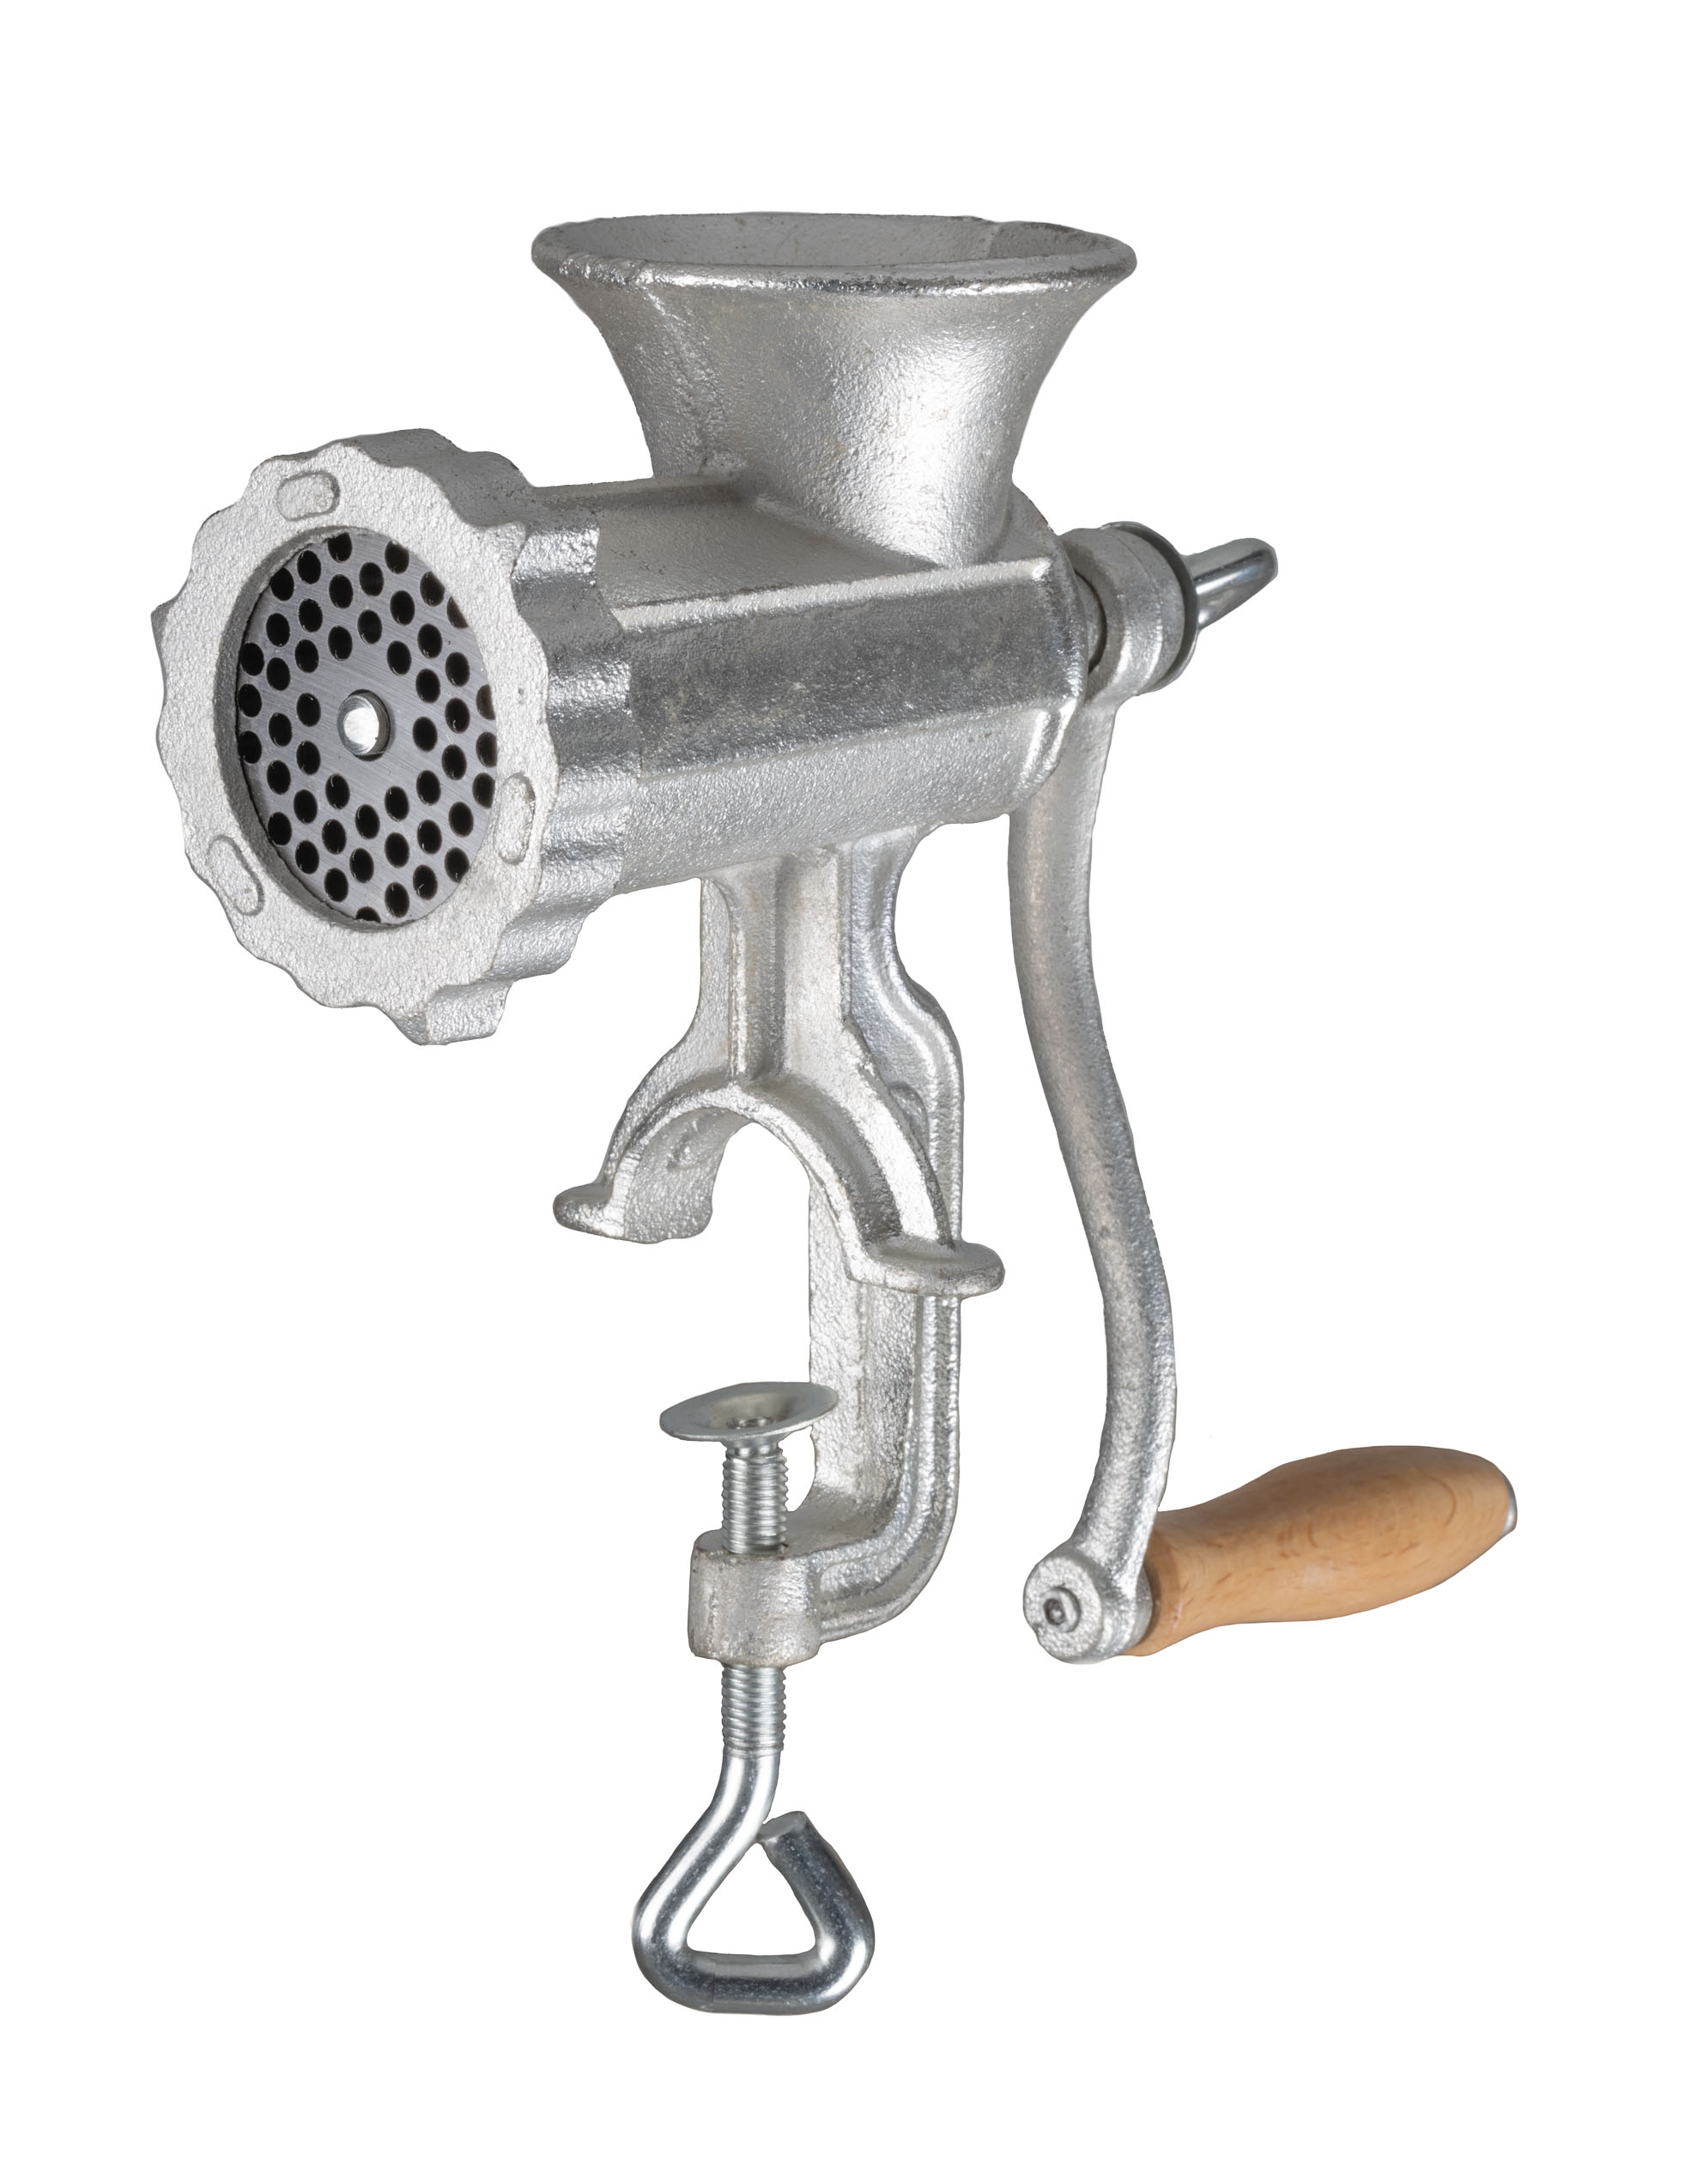 3-IN-1 Meat Grinder Mincer for Meat Sausage Manual Meat Grinder etc Churros Rotary Grinder Sausage Stuffer Easy to Clean 